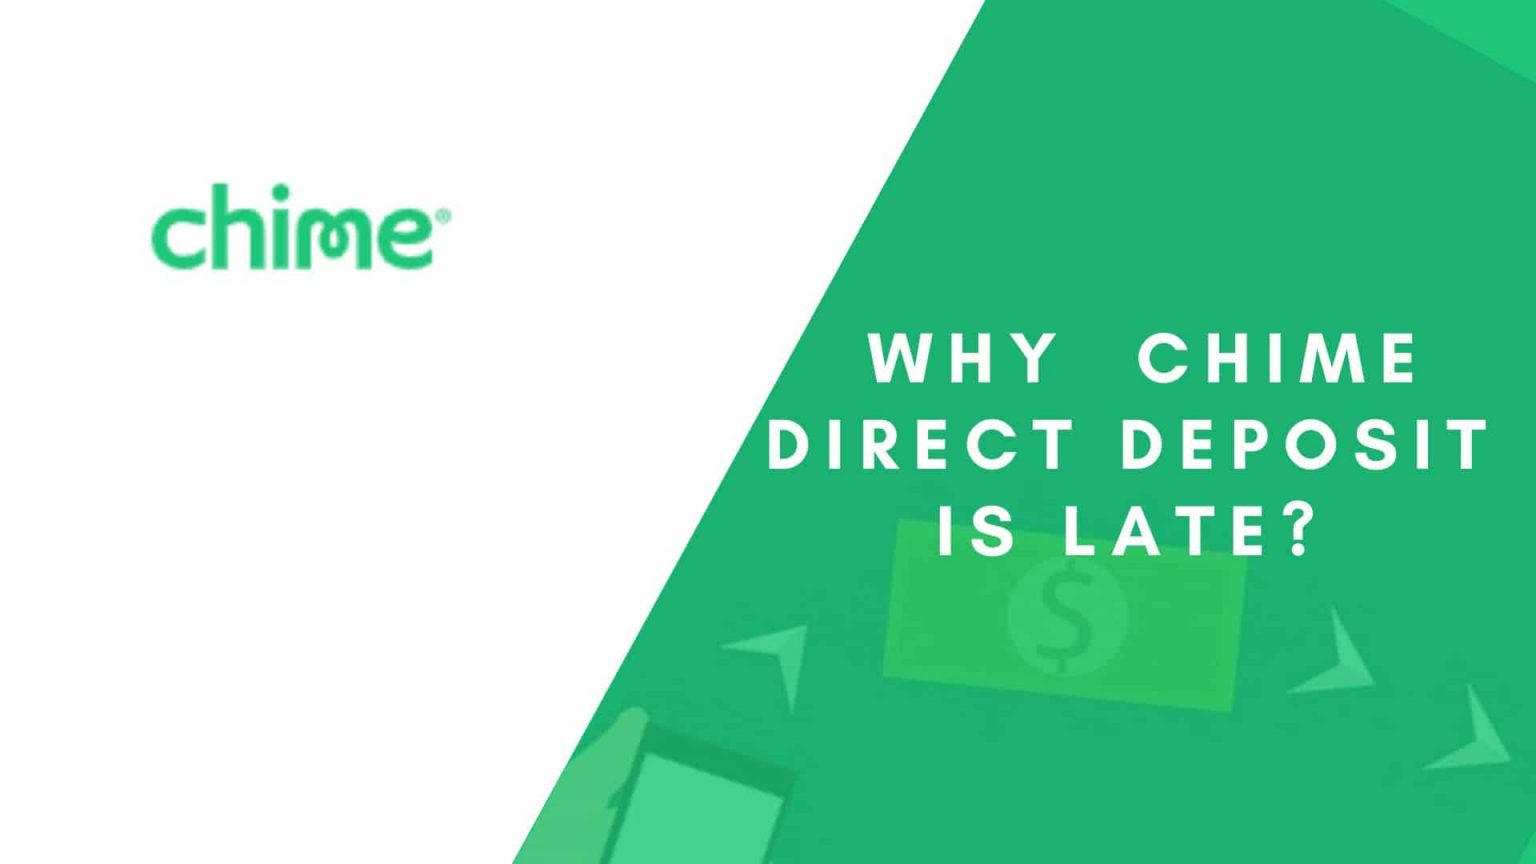 Why is Chime direct deposit late? Reasons & Fixes TheAppFlow